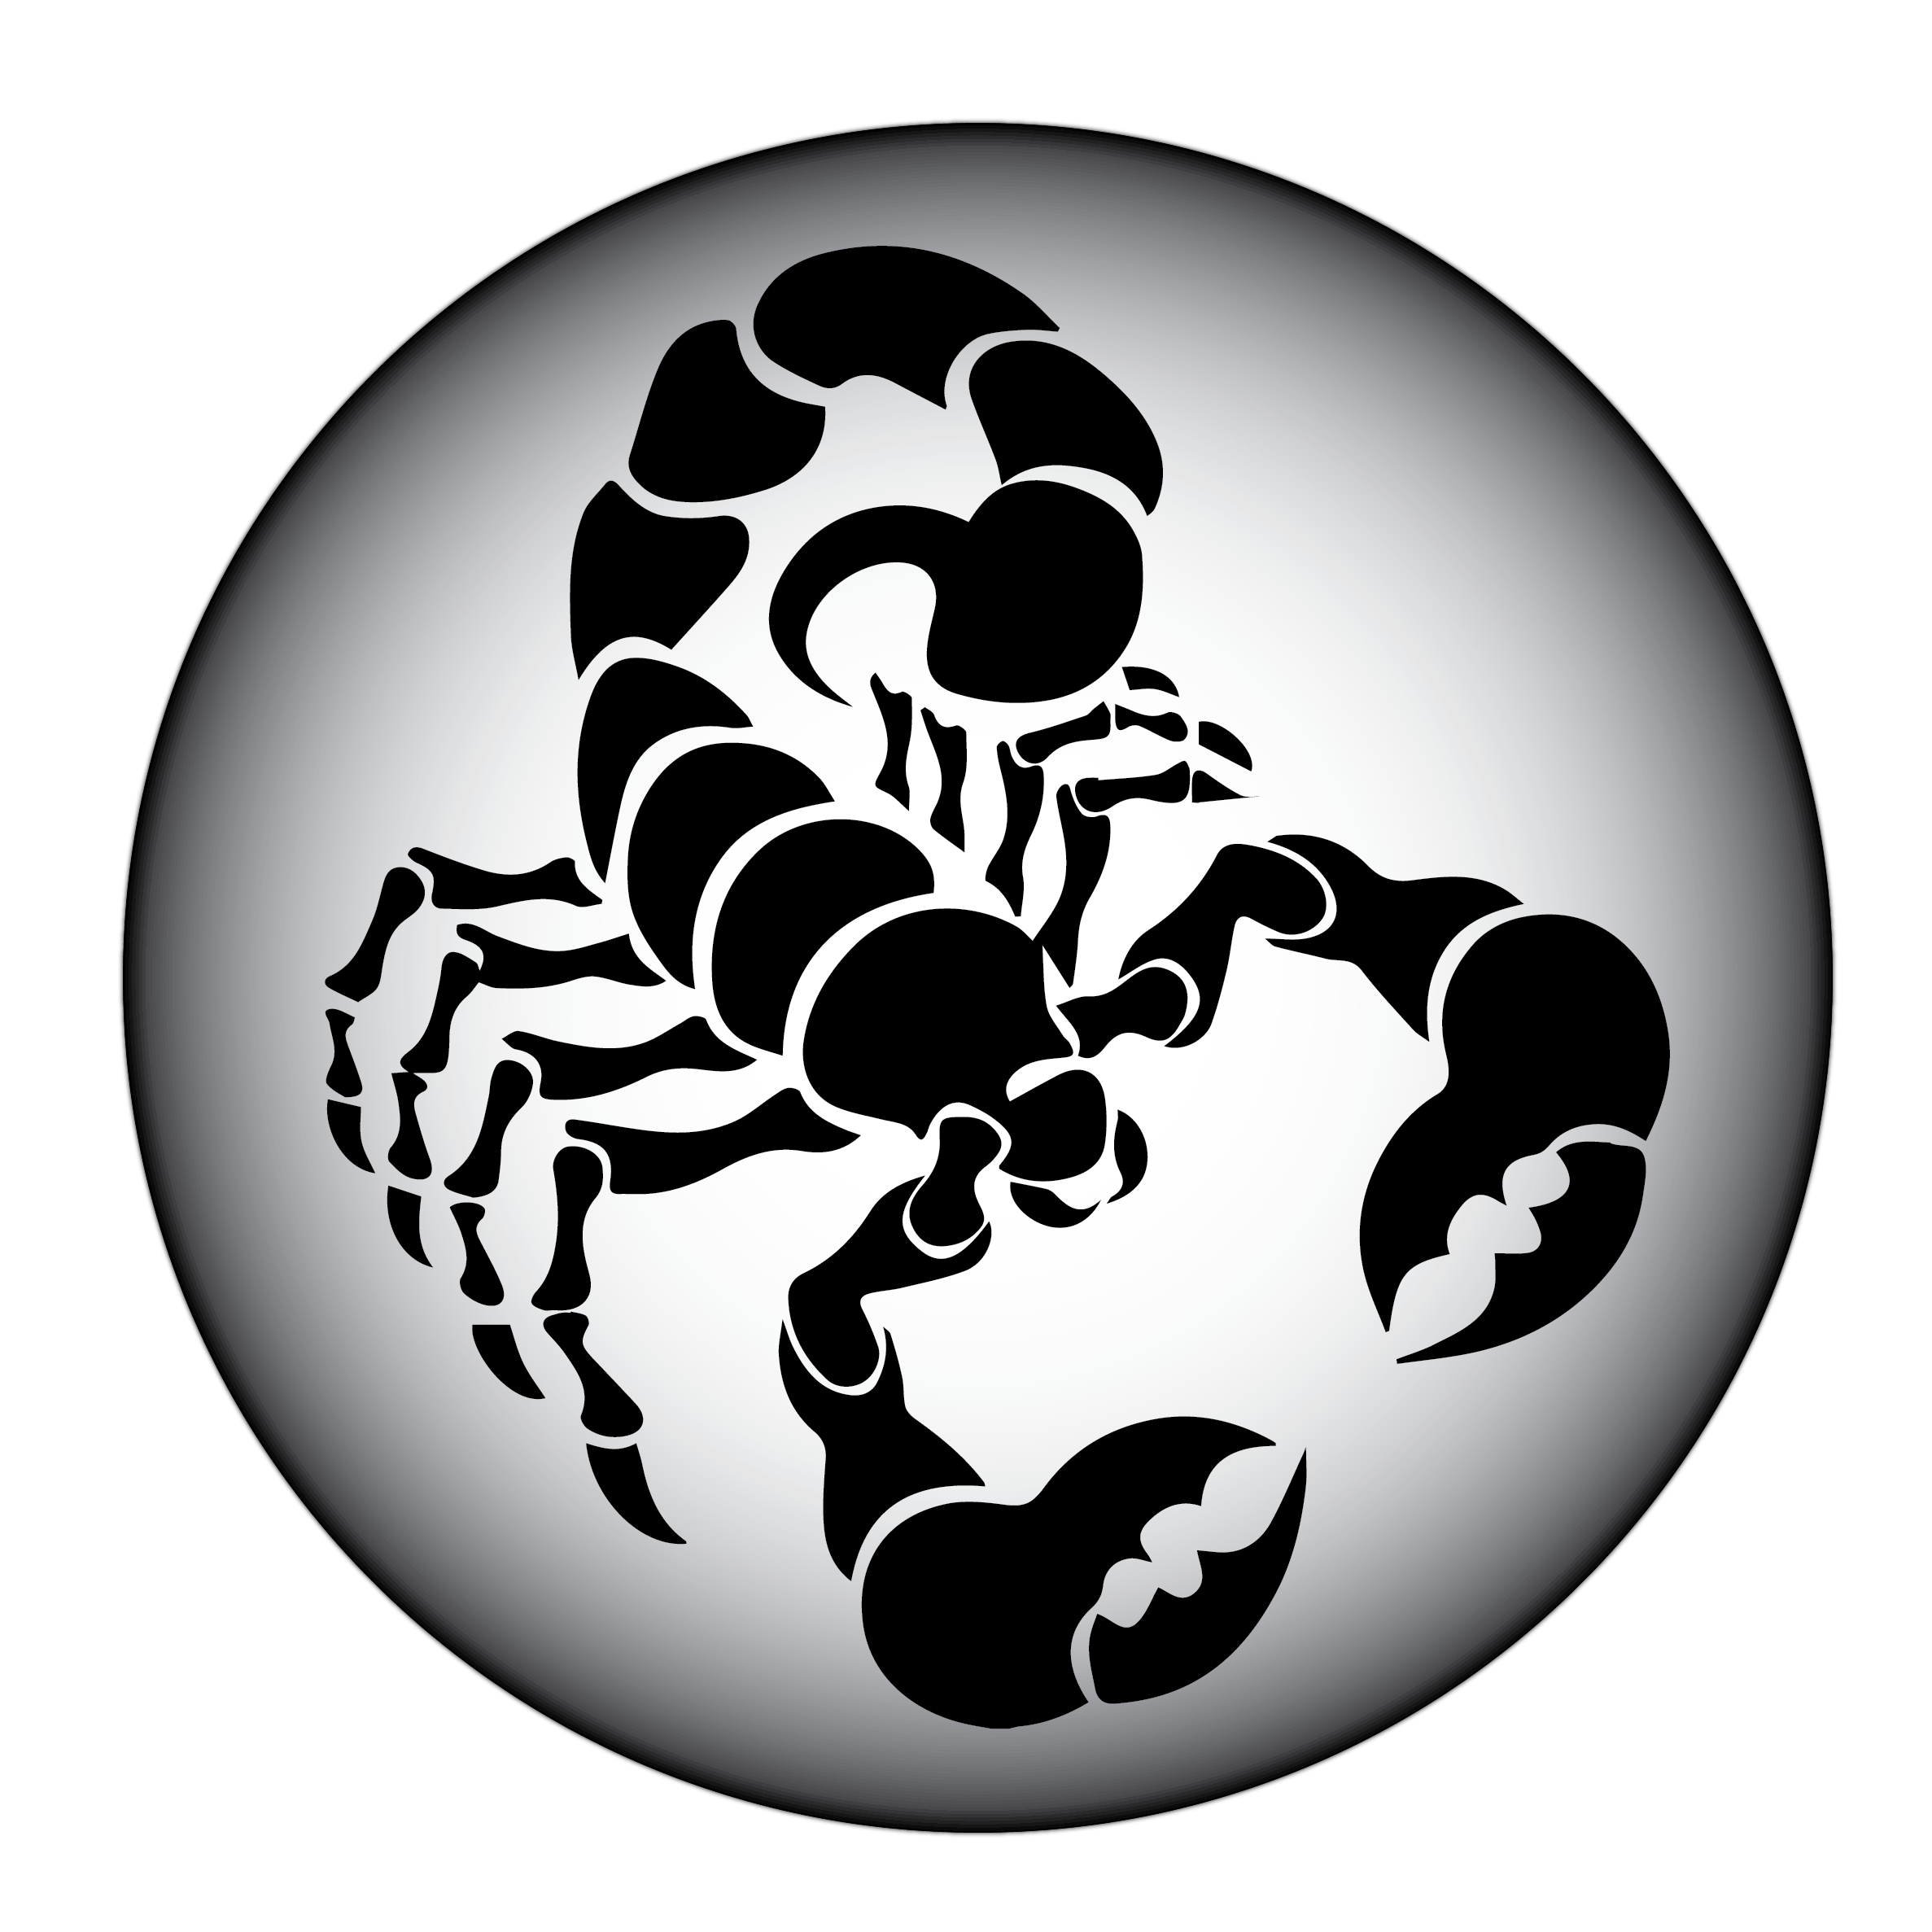 Scorpio Front PNG Image in High Definition #102192 600x561 Pixel ...